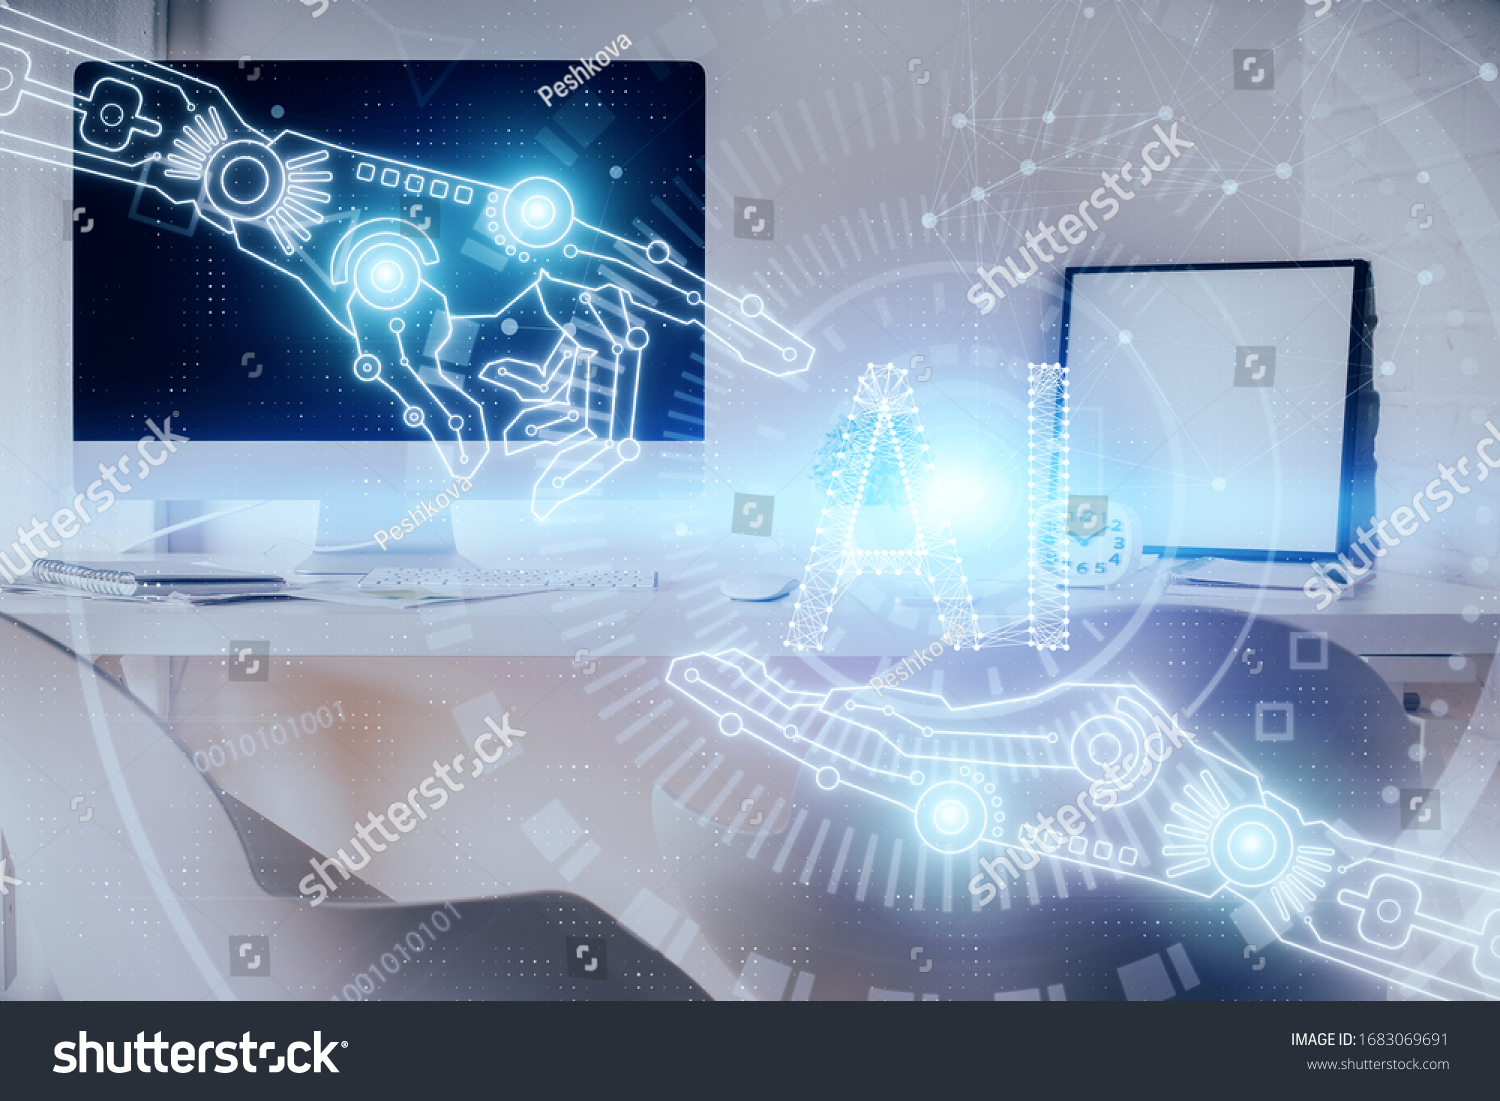 Multi exposure of data theme drawing and office interior background. Concept of technology. #1683069691